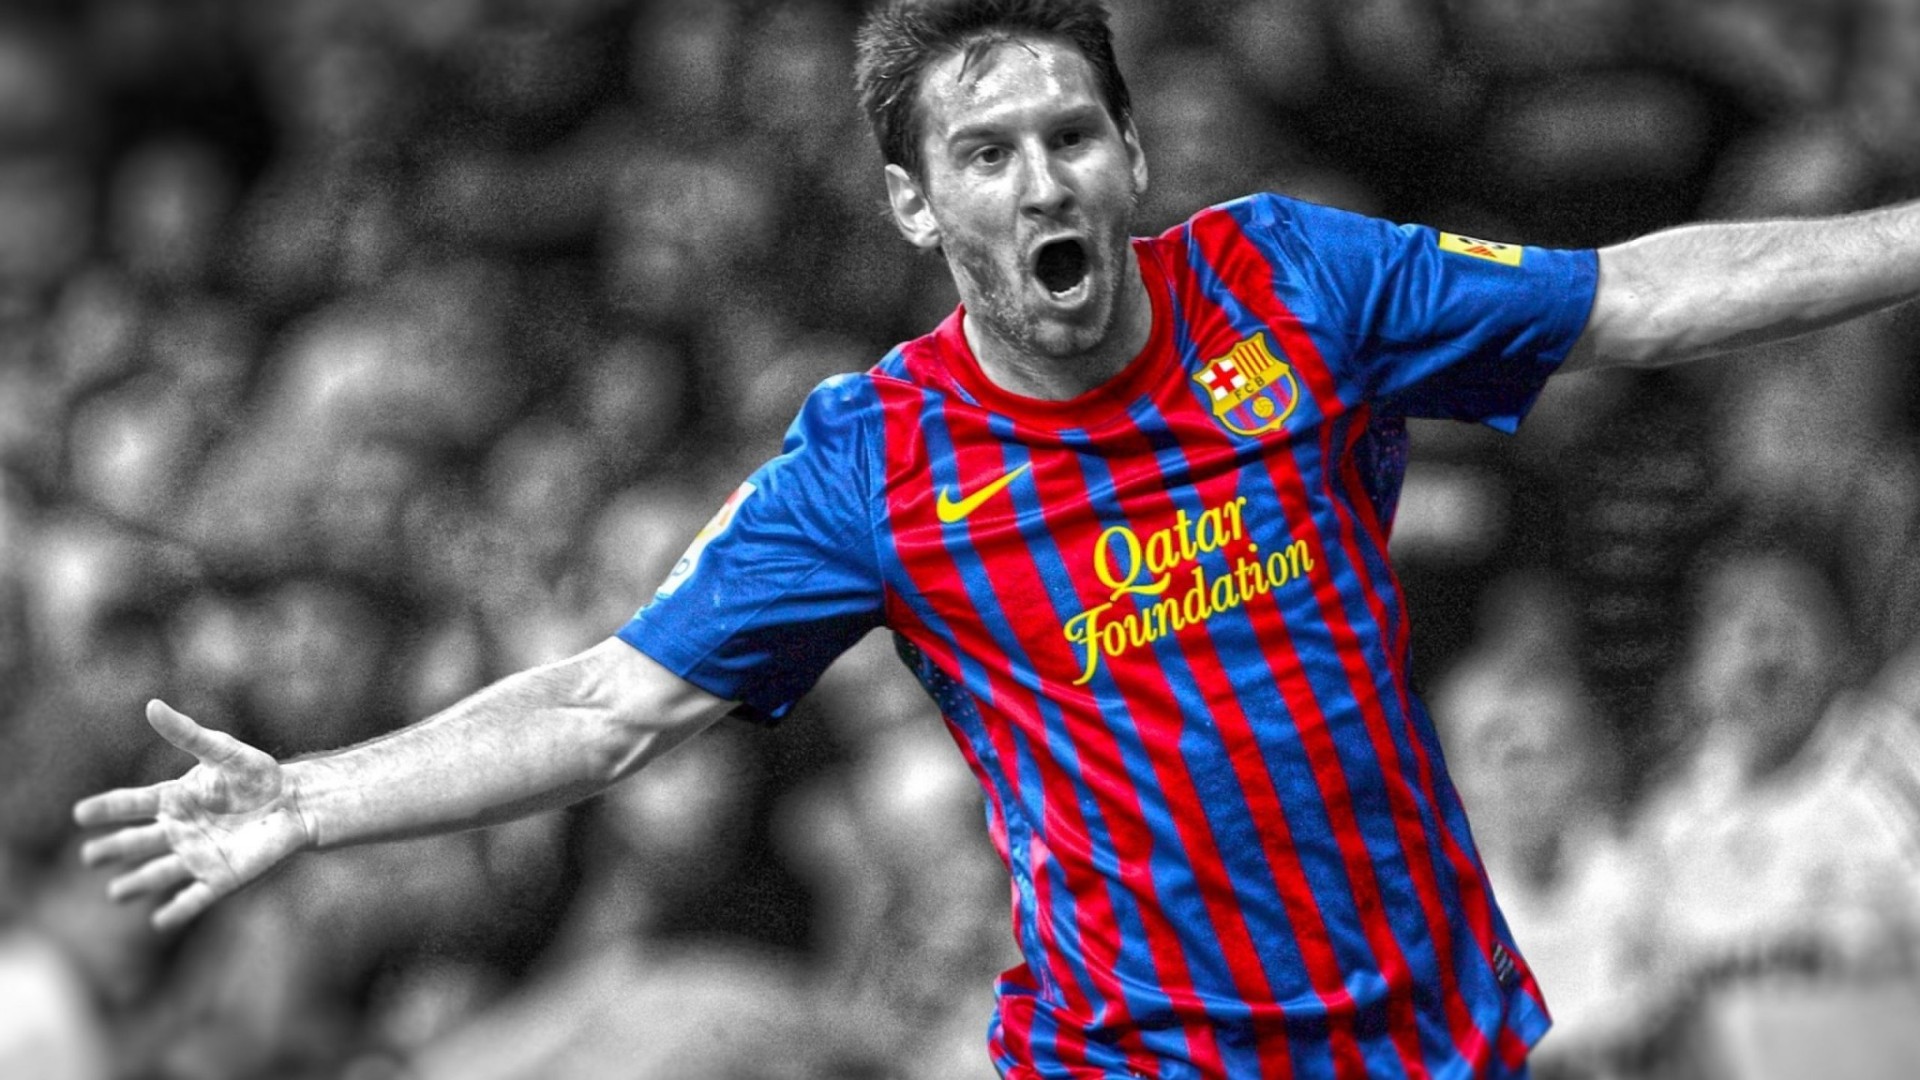 The Best Football Player Of Barcelona Lionel Messi Wallpaper And